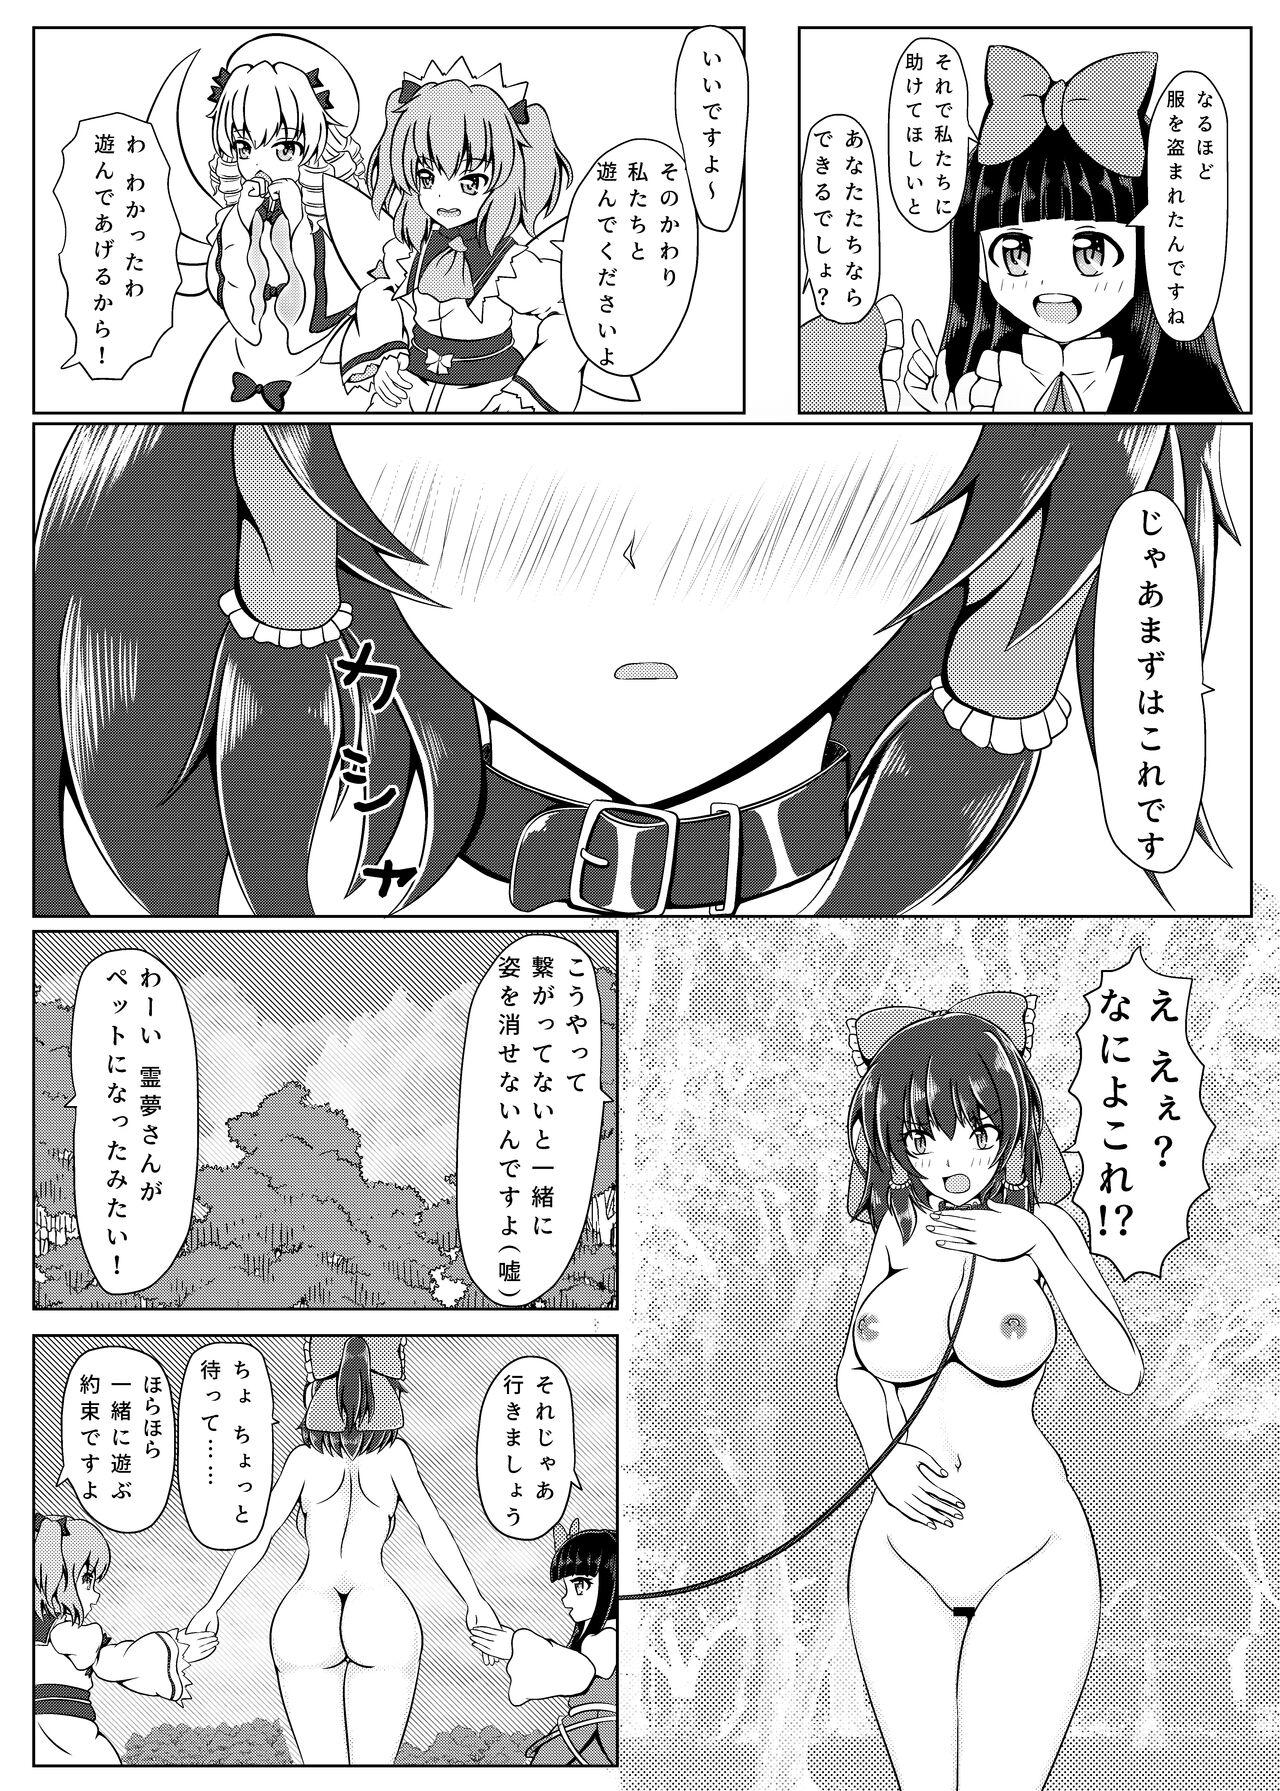 Mexican 霊夢さんと遊ぼう!! - Touhou project Bhabi - Page 5